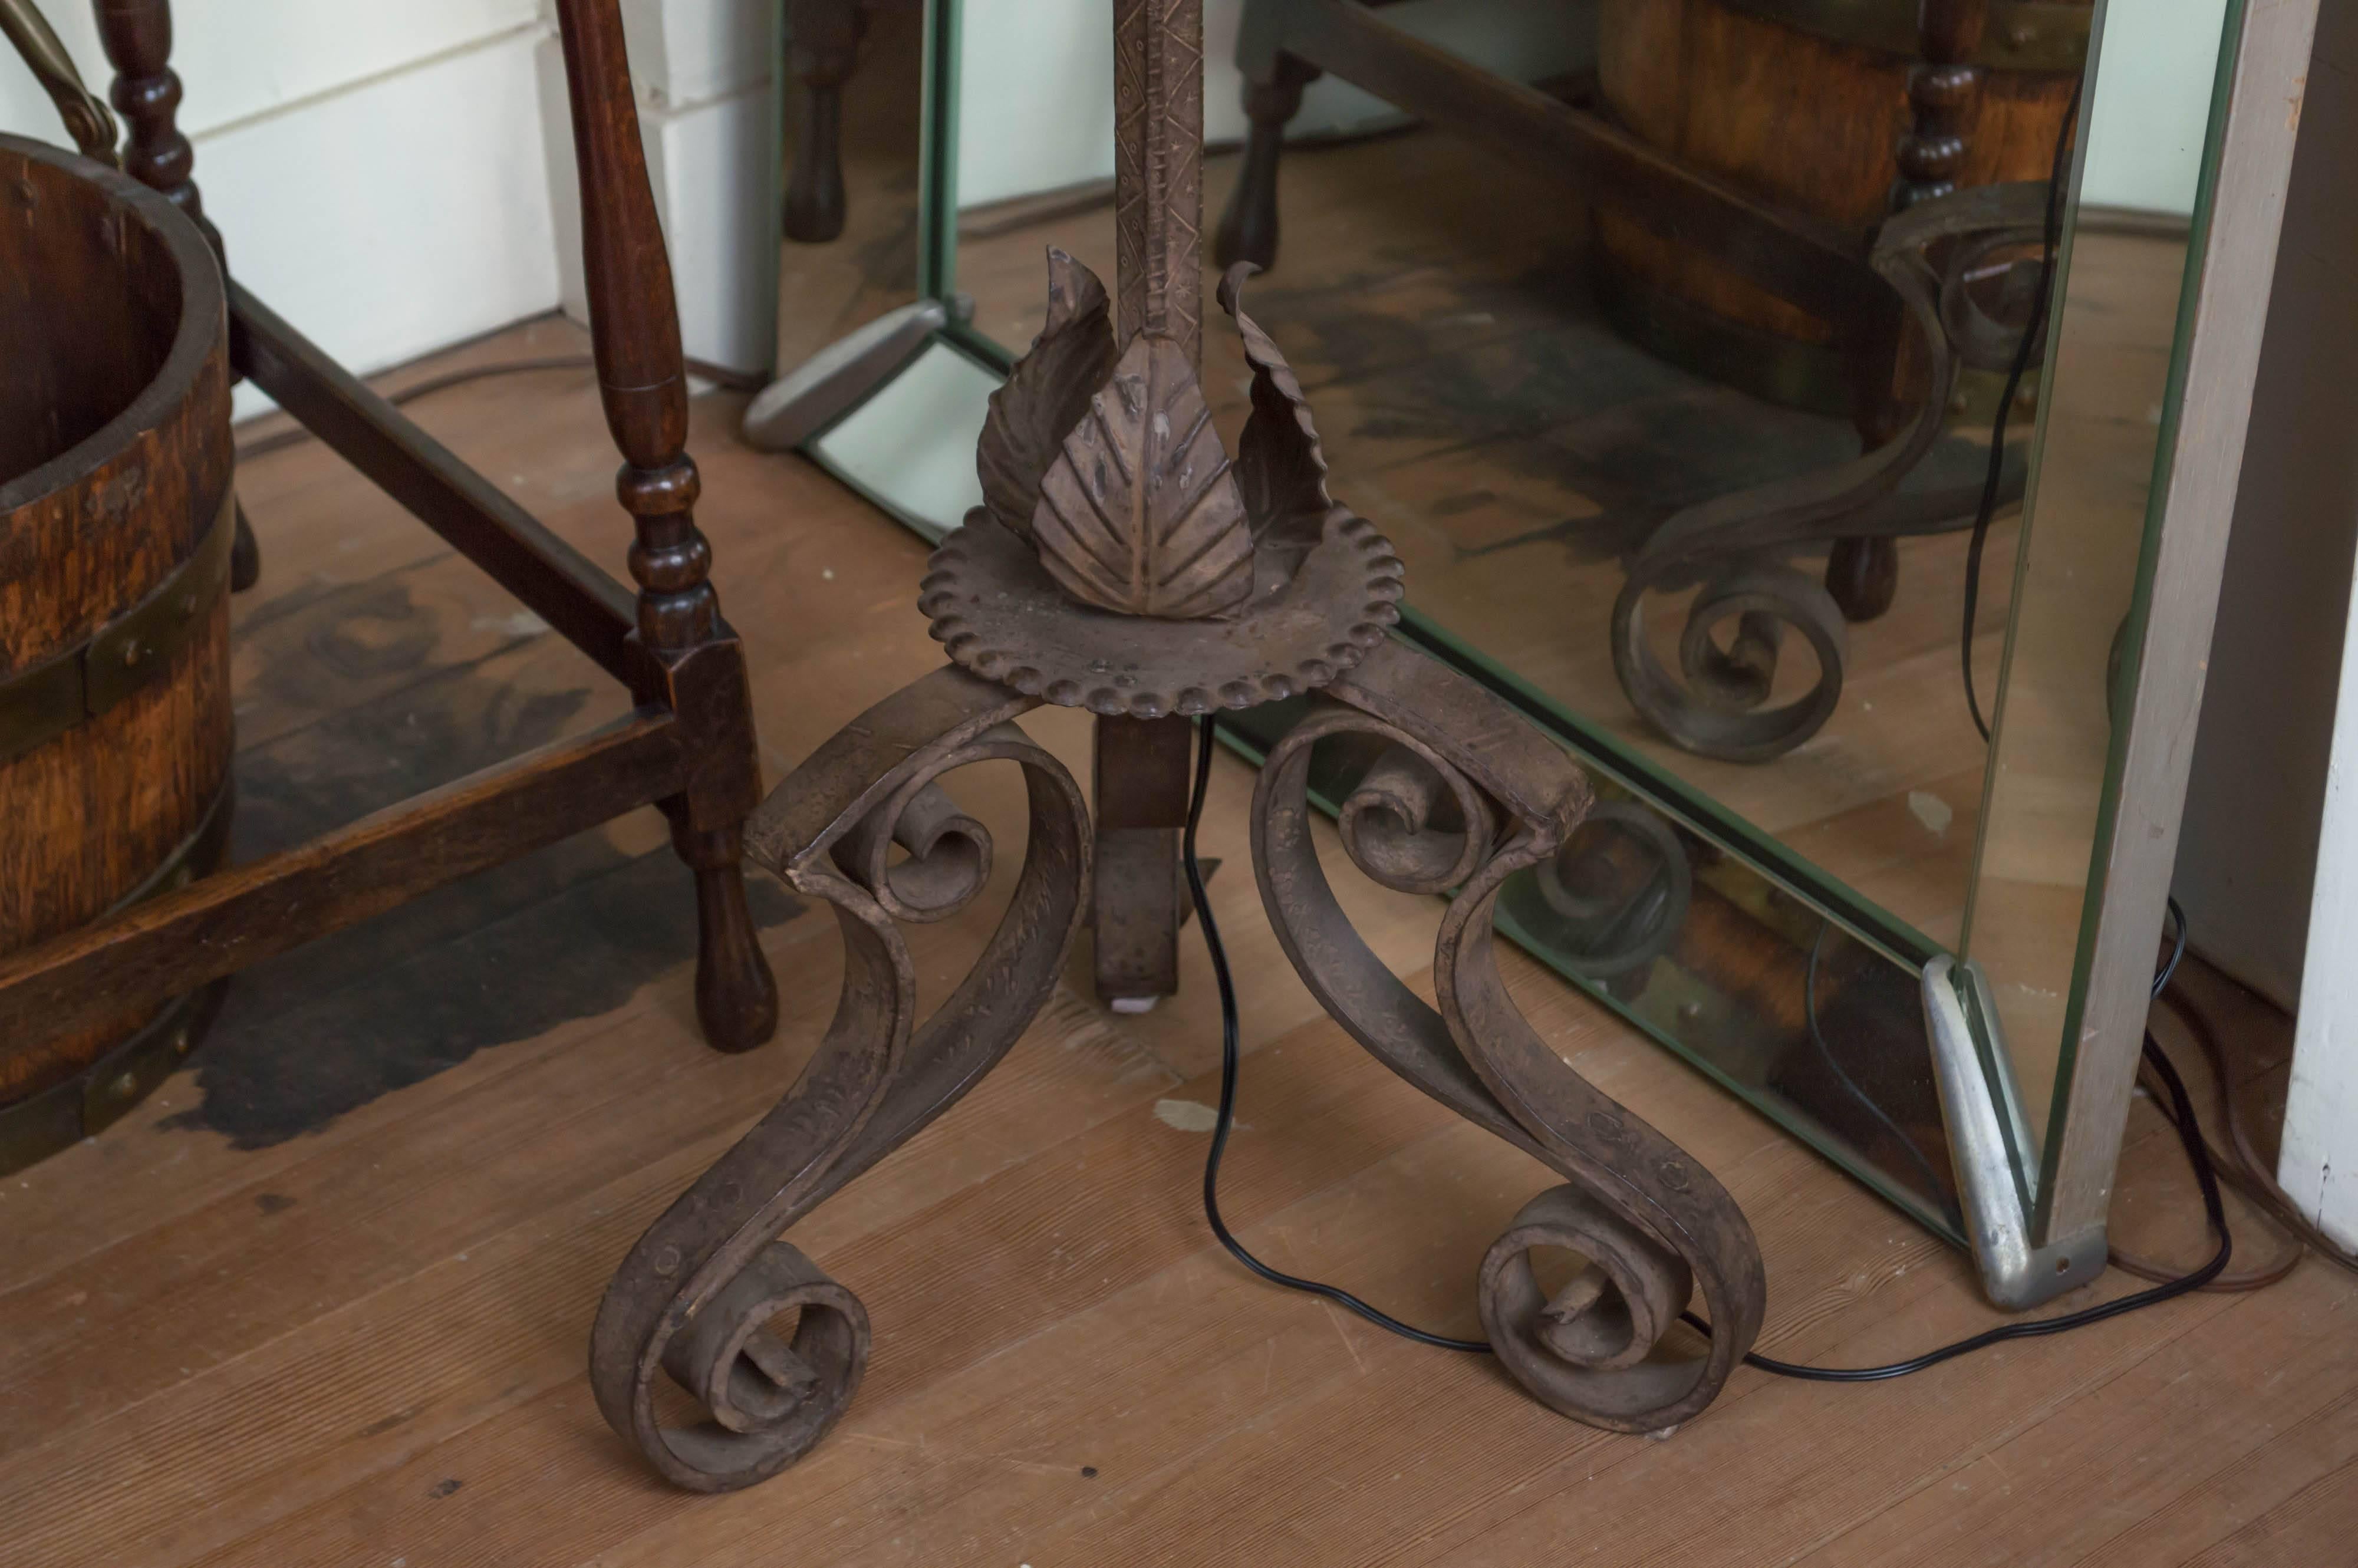 17th century Baroque style ornate wrought iron candle stand floor lamp, circa 1880.
Italian made, fabricated in the manner of period iron work. Stamped details, rivets and drawn out ornamental flourishes. New wiring, three way switch, and